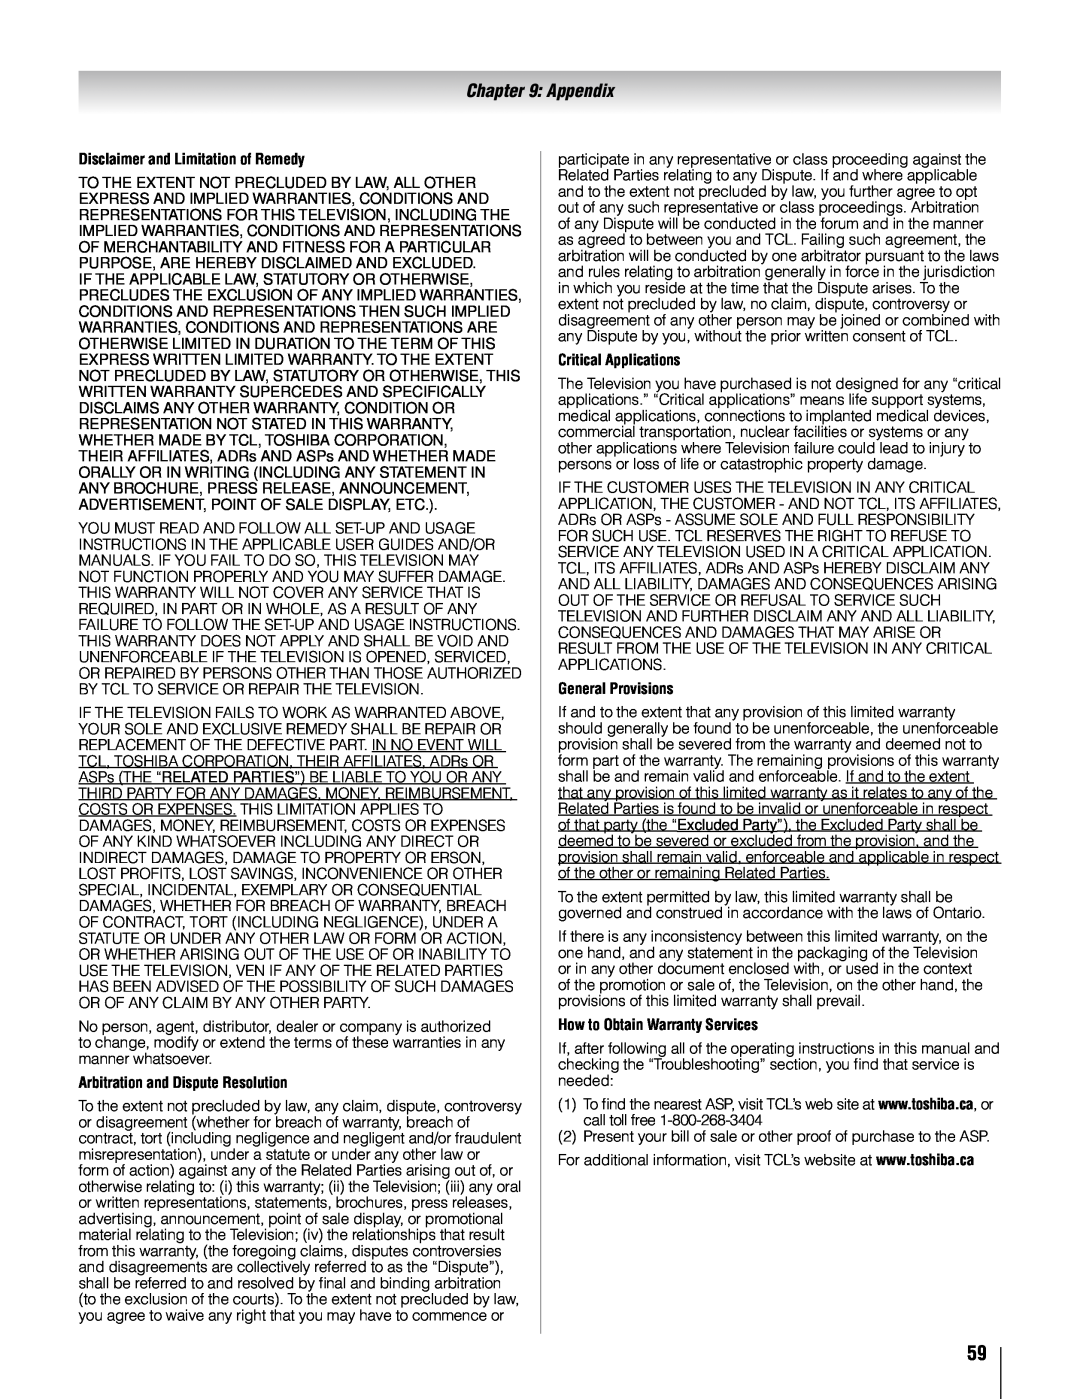 Toshiba 26AV502U Appendix, Disclaimer and Limitation of Remedy, Arbitration and Dispute Resolution, Critical Applications 